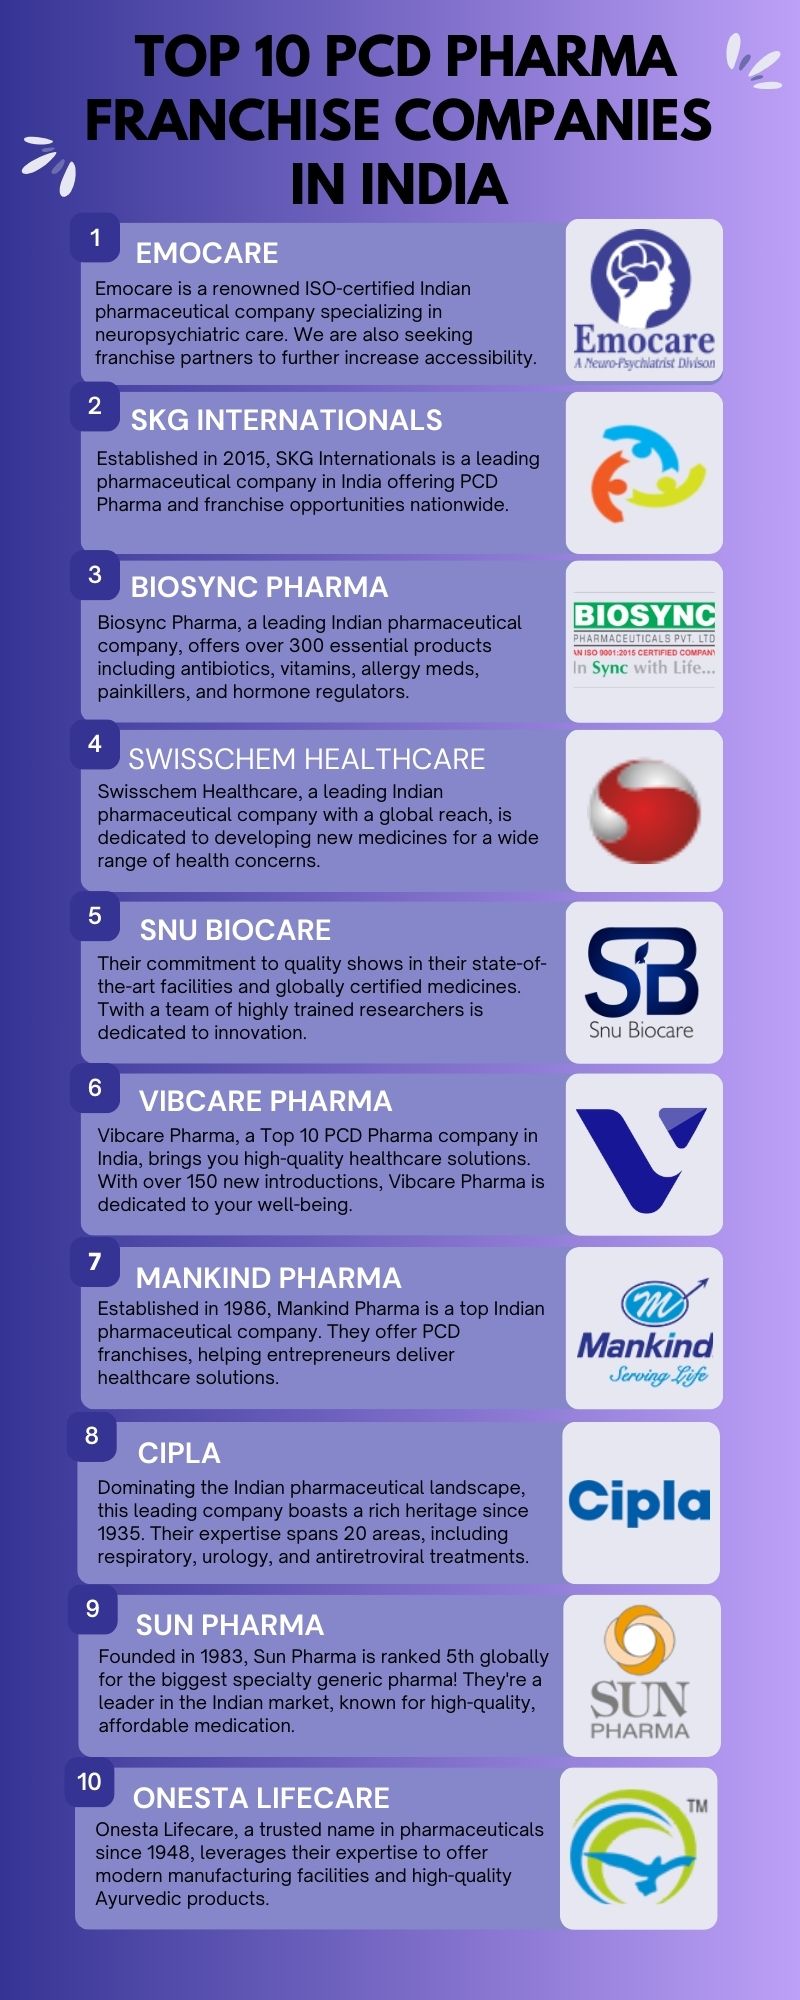 Top 10 PCD Pharma Franchise Companies In India